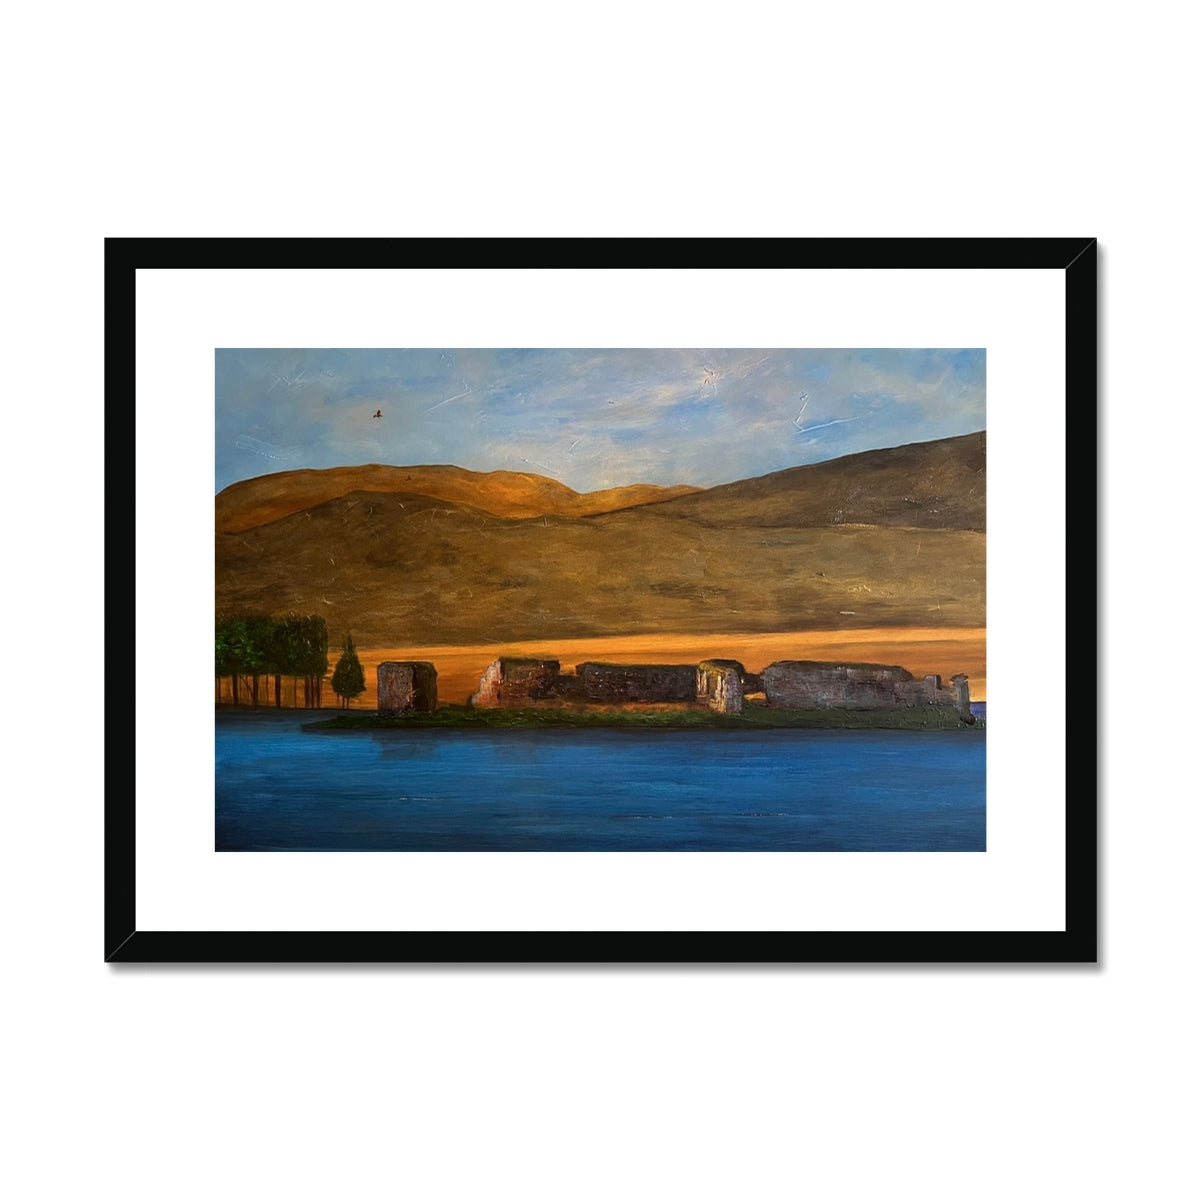 Lochindorb Castle Painting | Framed & Mounted Prints From Scotland-Framed & Mounted Prints-Scottish Lochs & Mountains Art Gallery-A2 Landscape-Black Frame-Paintings, Prints, Homeware, Art Gifts From Scotland By Scottish Artist Kevin Hunter